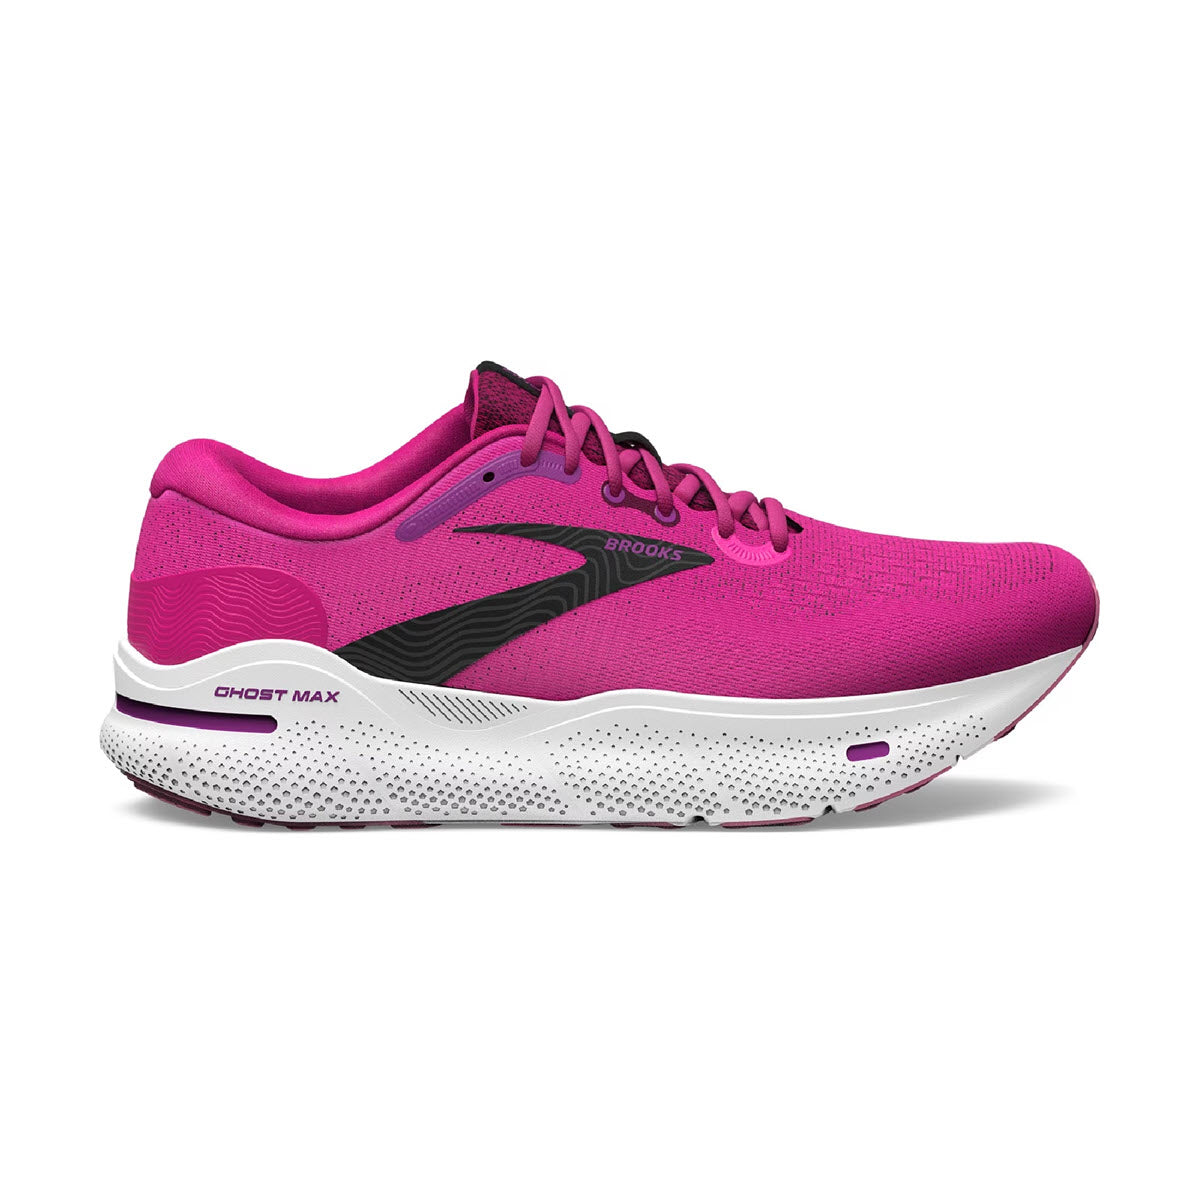 A single pink Brooks Ghost Max running shoe featuring DNA Loft v2 foam and a black logo on the side, set against a white background.